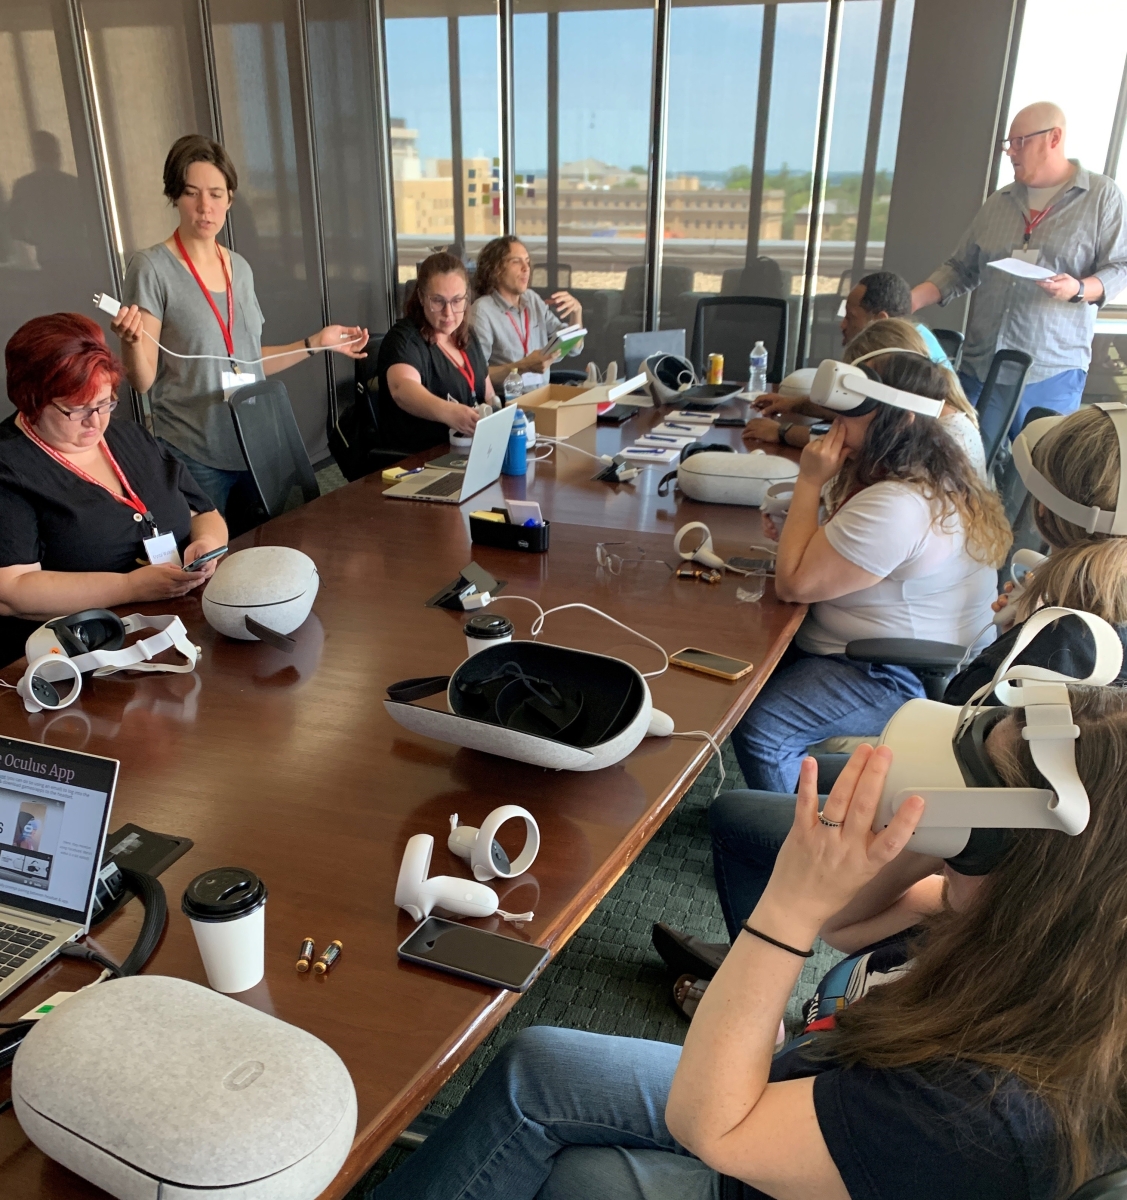 Librarians testing VR headsets in a conference room